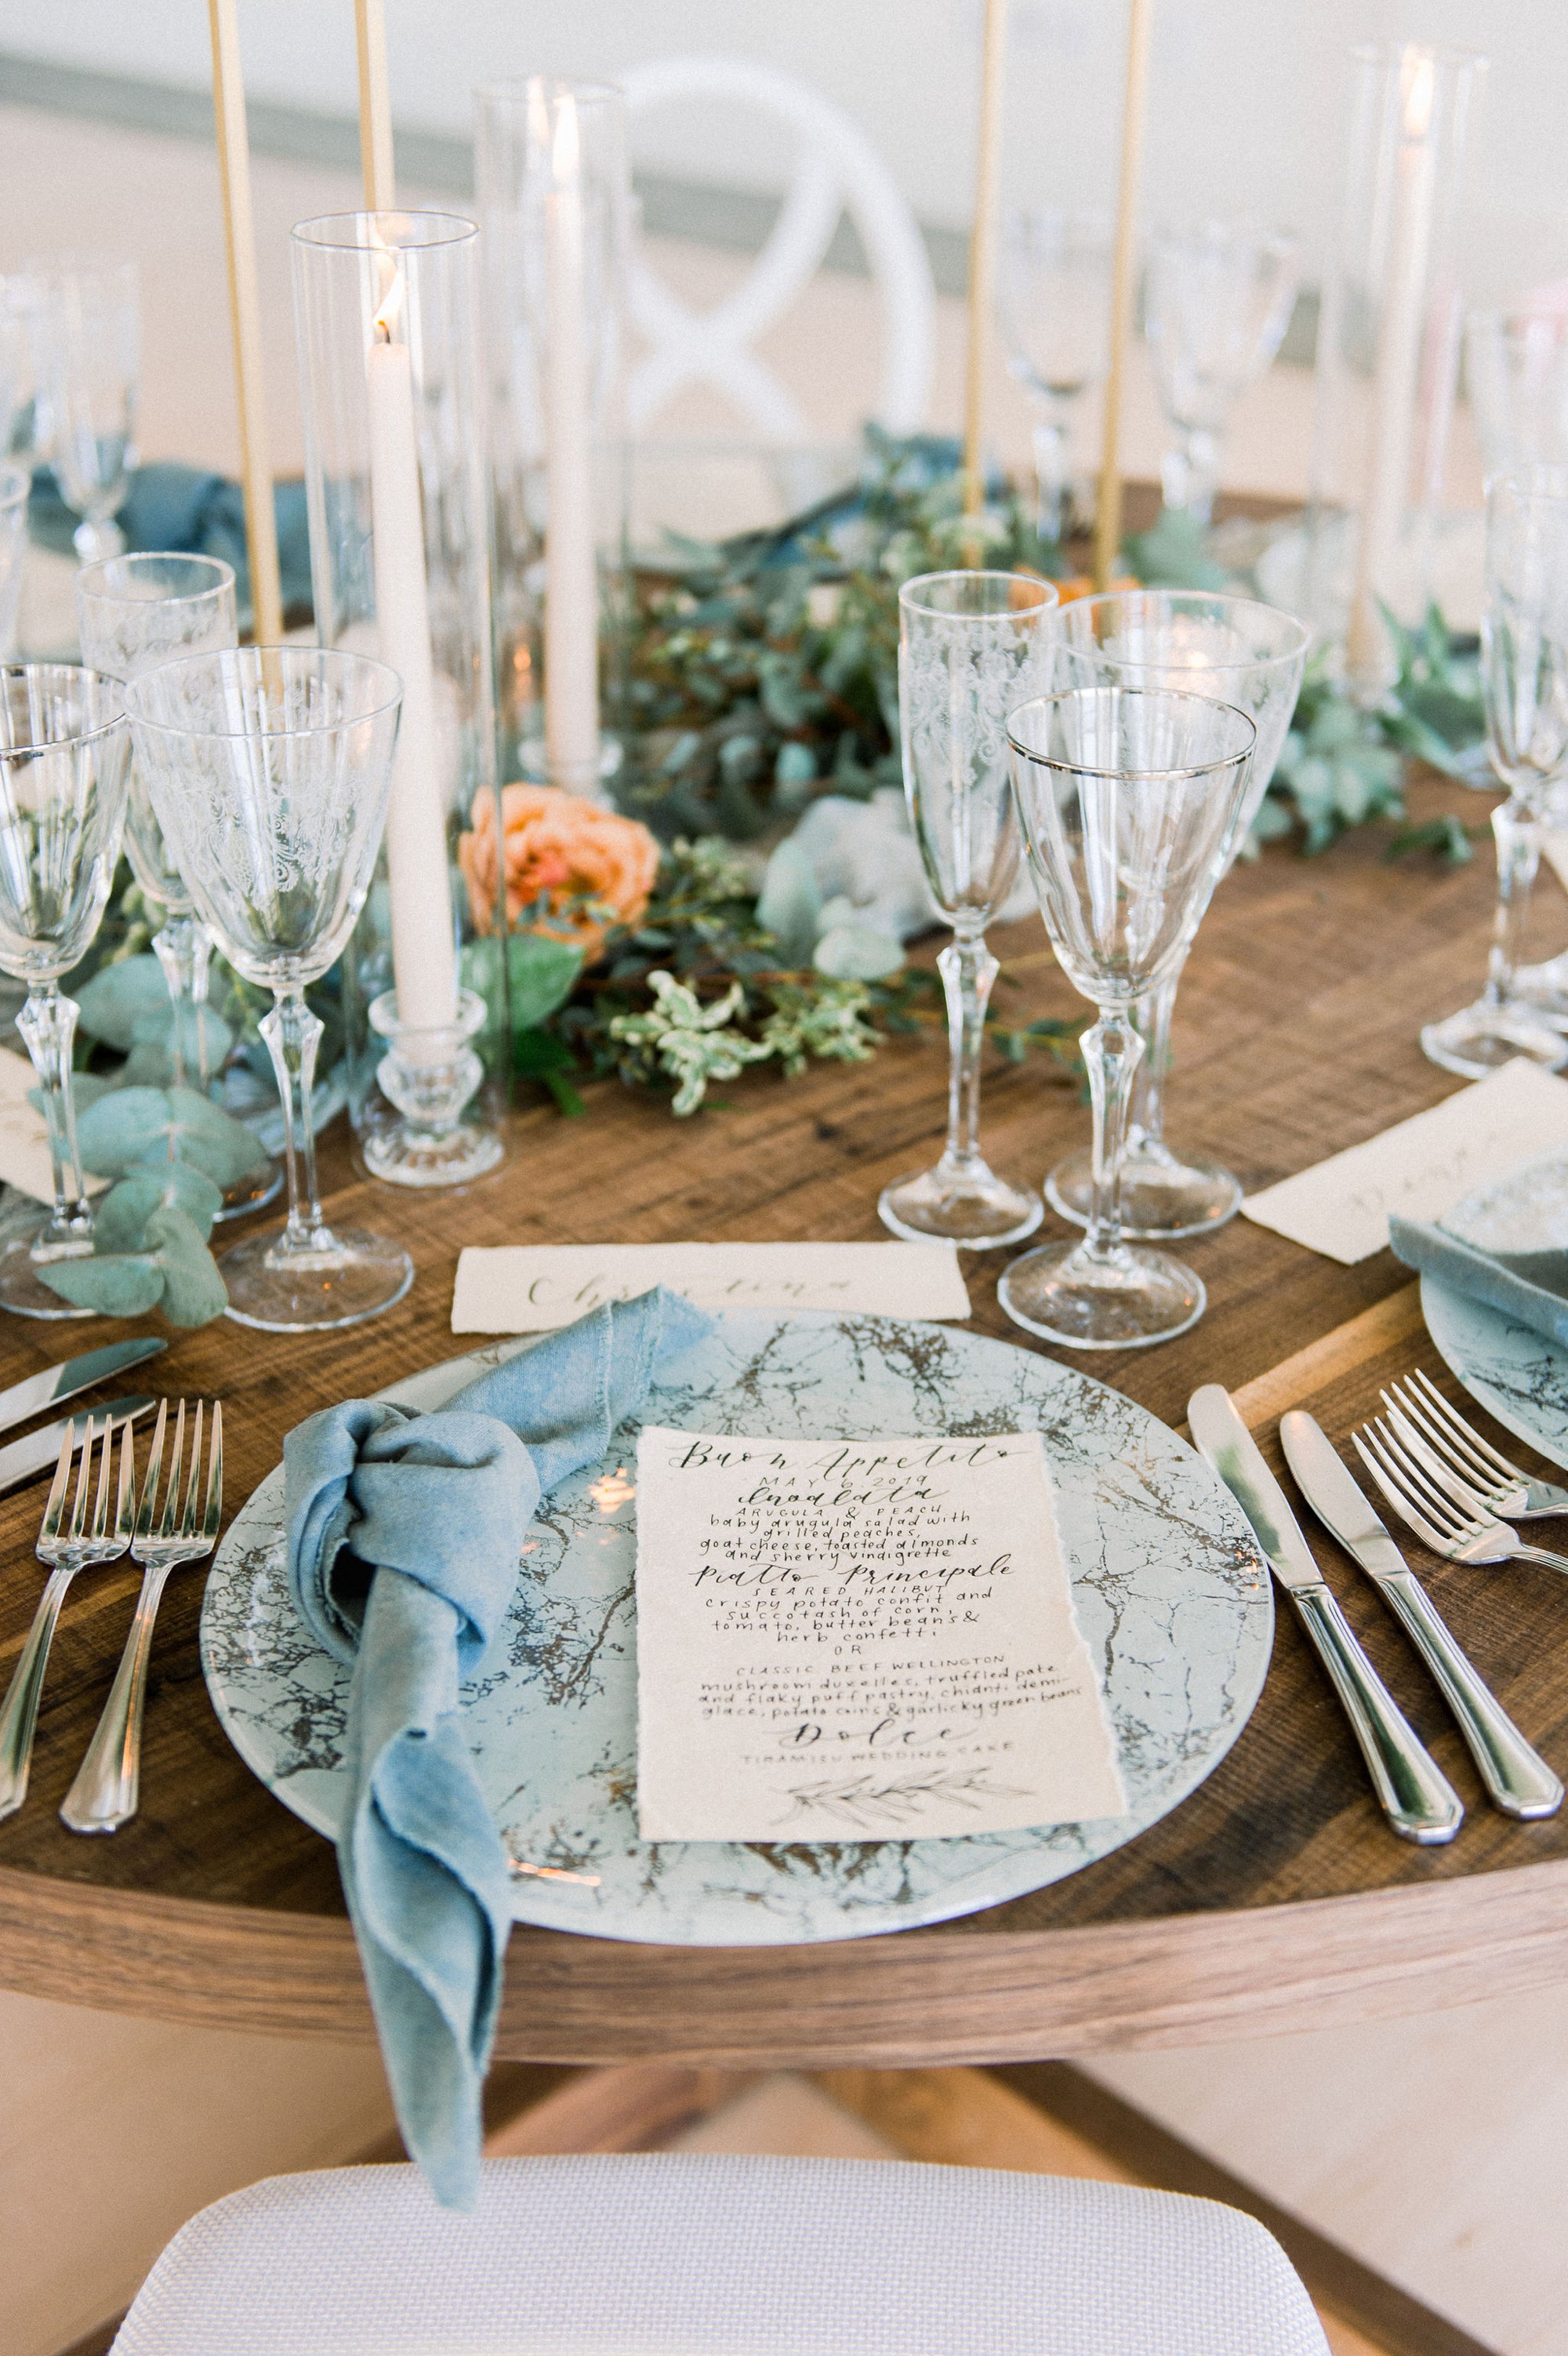 Gloucester MA Beauport Hotel Wedding | Tuscan meets modern | Party Rental LTD glass marble charger, glassware, and cloth napkins | hand lettered calligraphy wedding menus